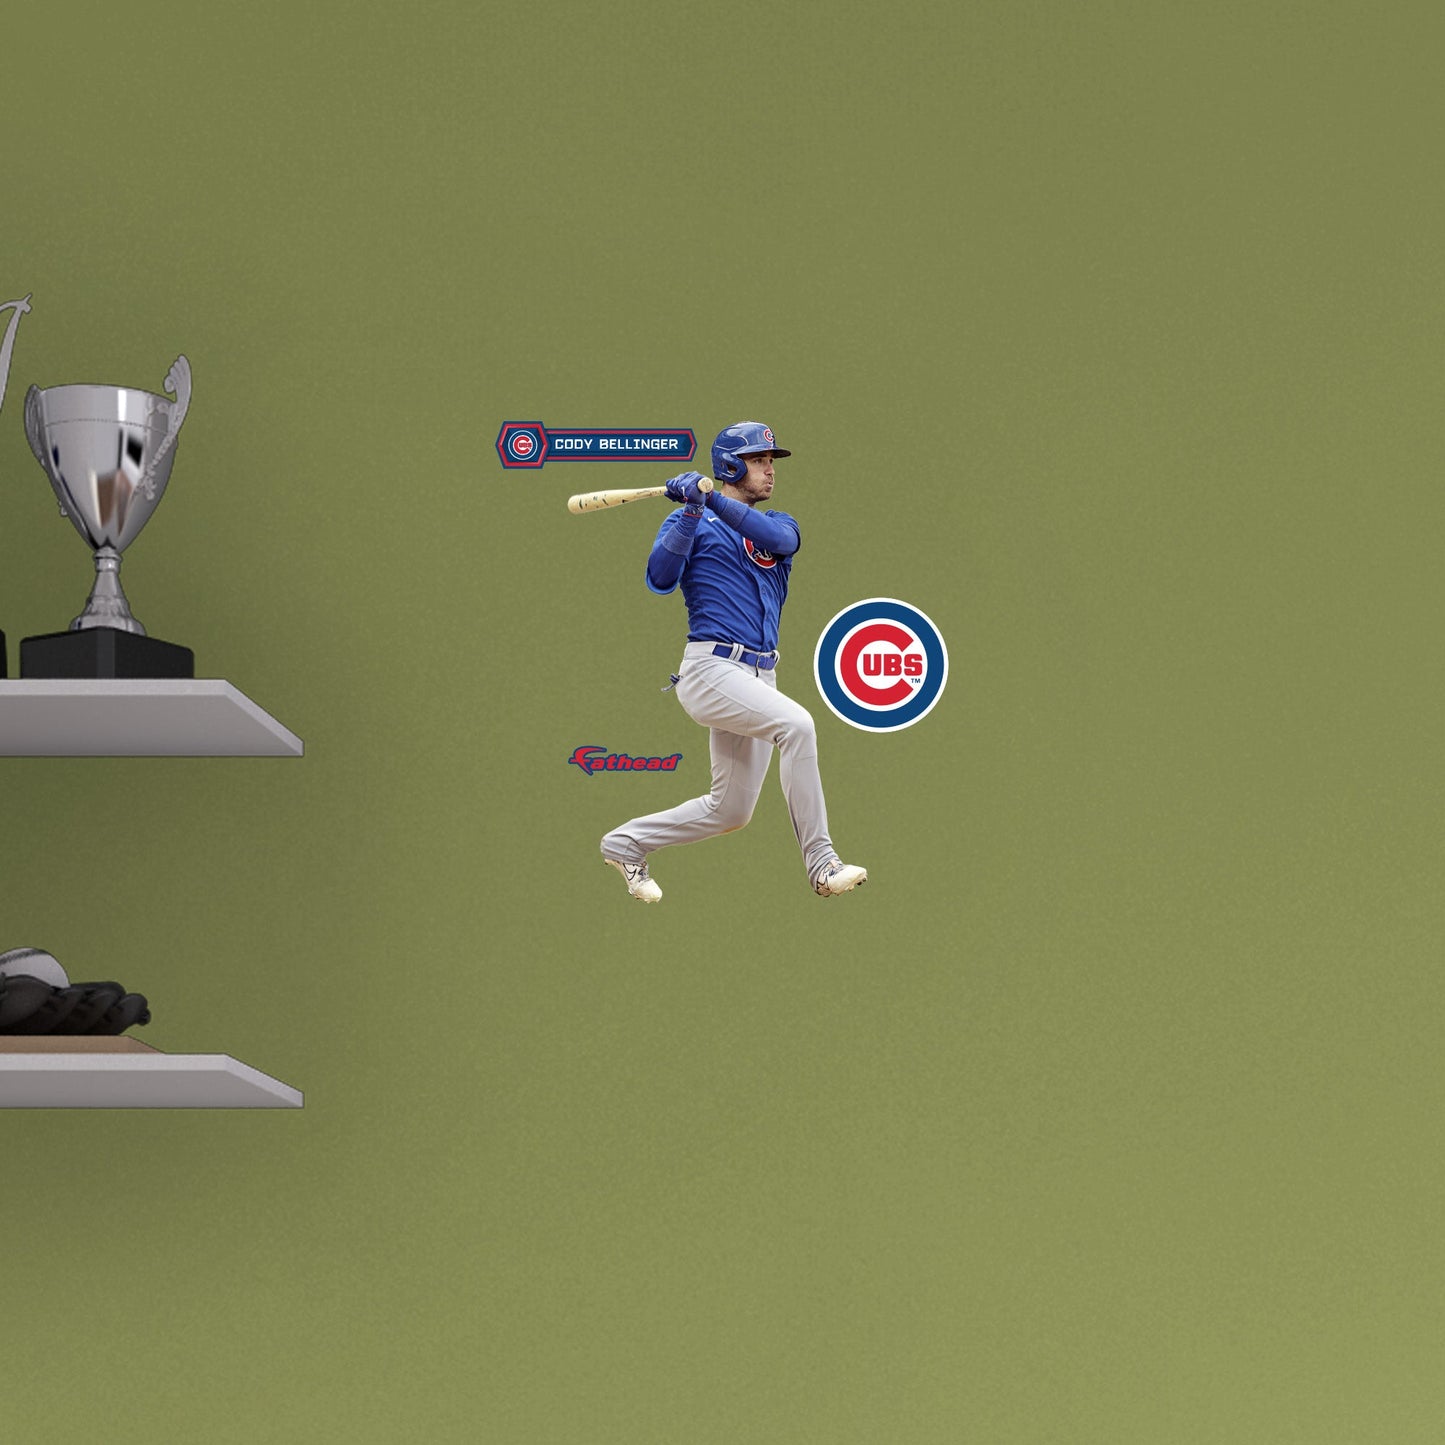 Chicago Cubs: Cody Bellinger  Swing        - Officially Licensed MLB Removable     Adhesive Decal